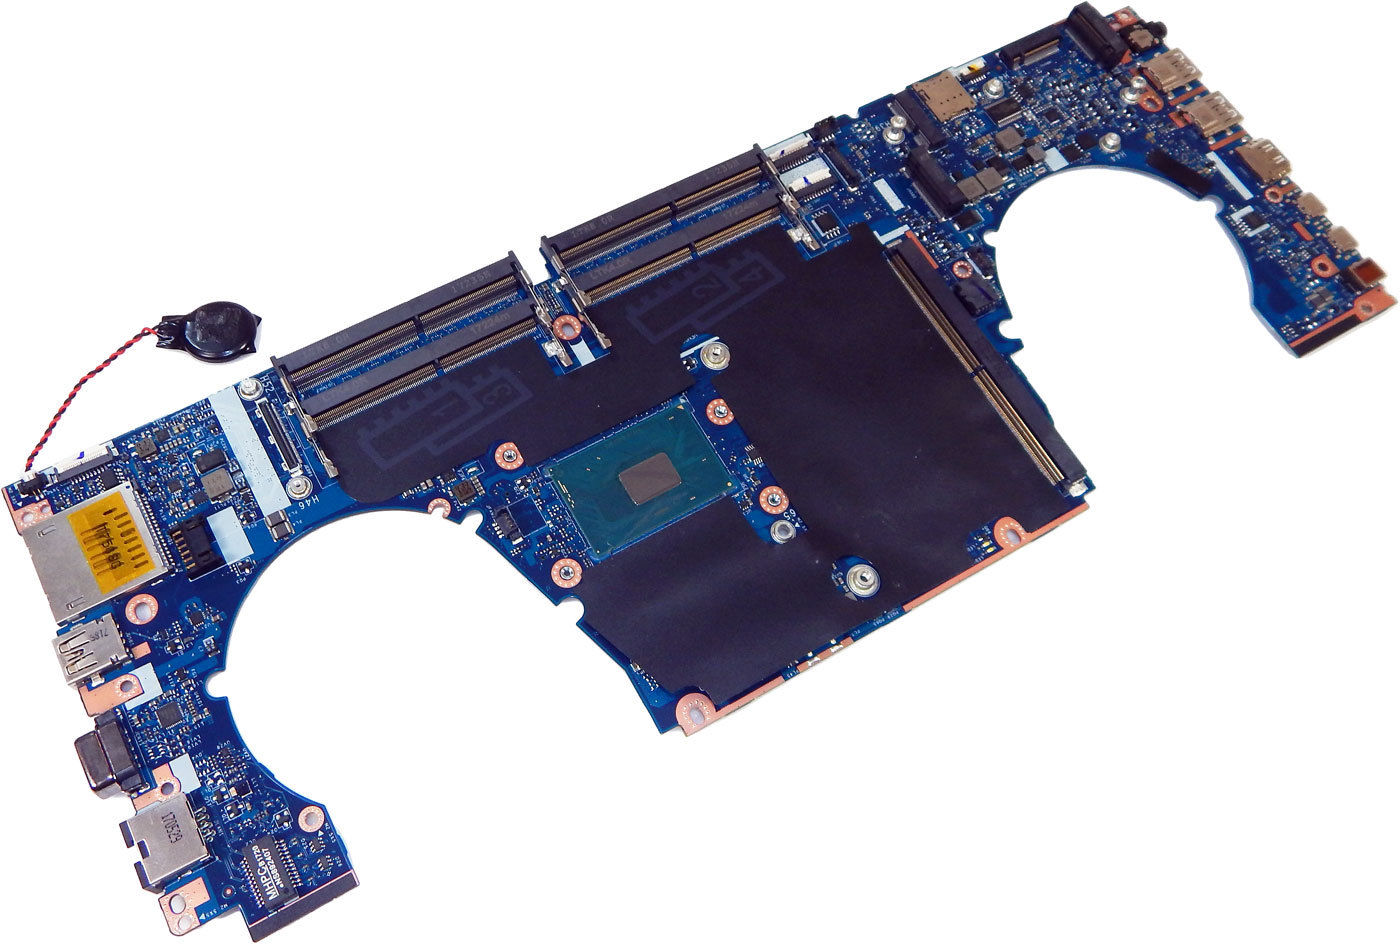 HP Zbook 15 G3 i7-6700HQ 2.6 Ghz Motherboard 848219-001